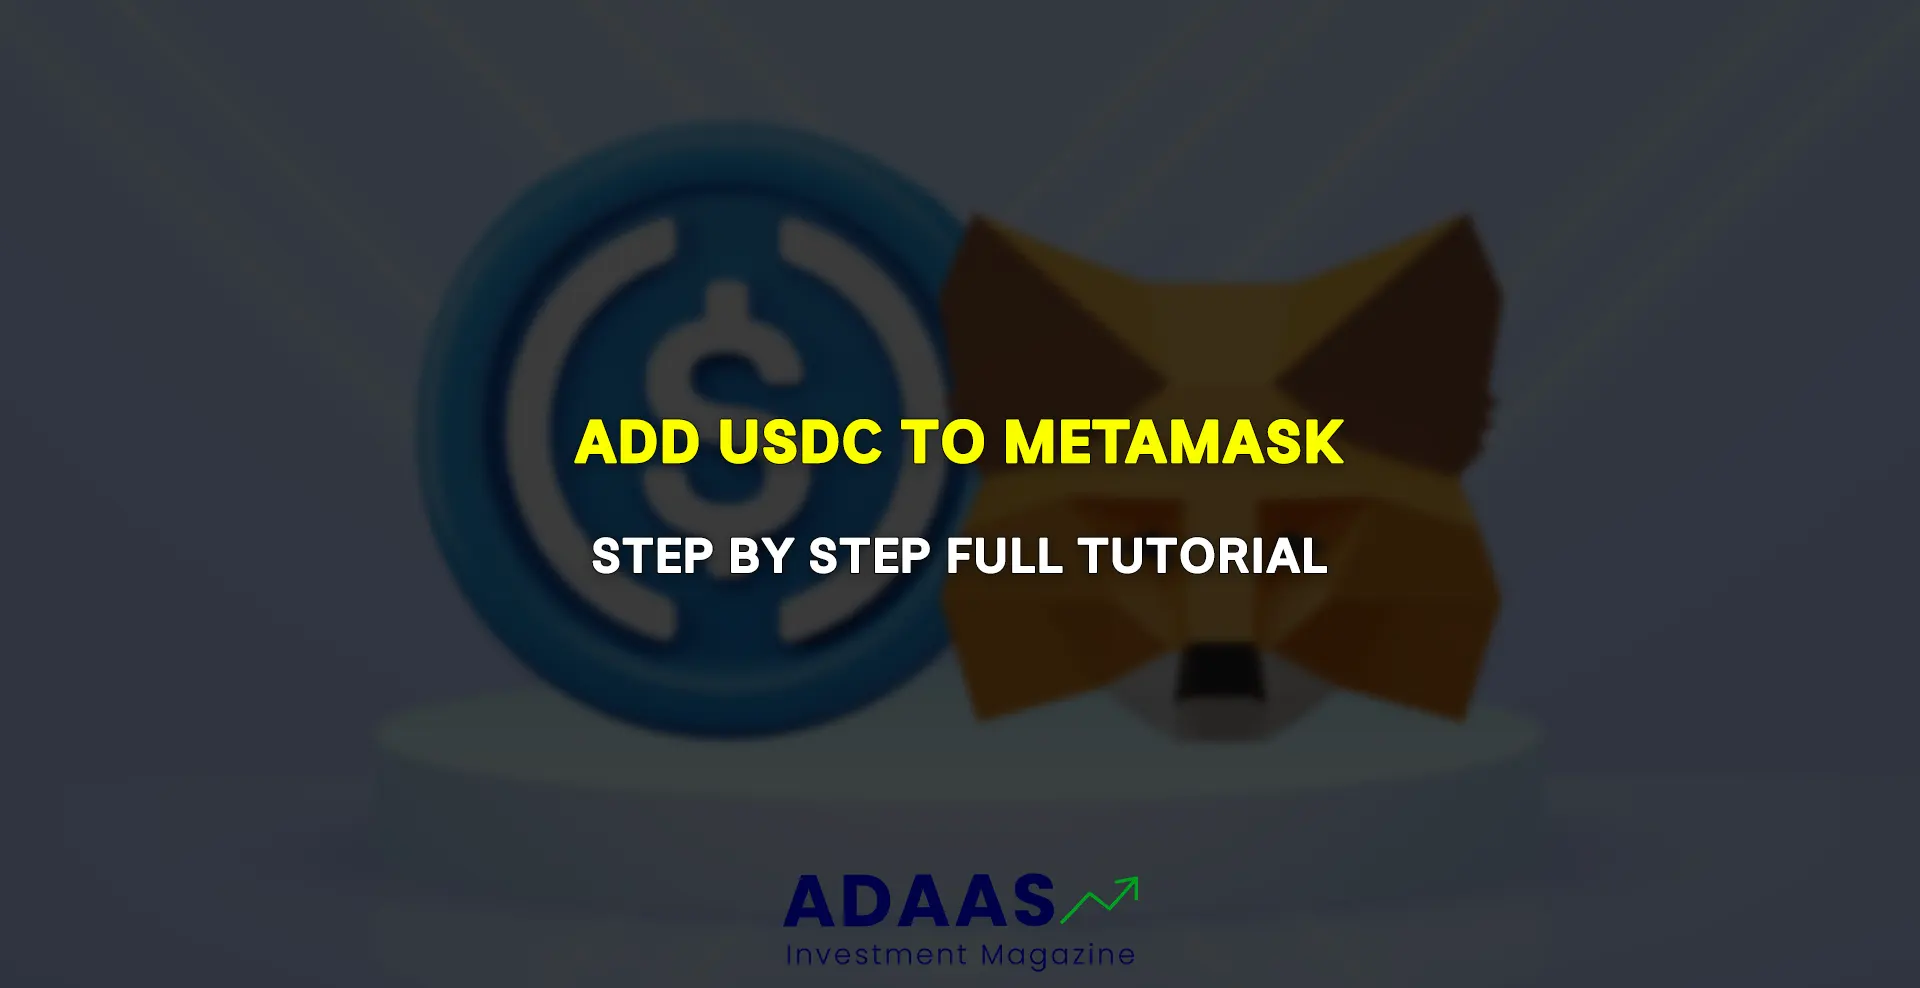 Using Metamask for USDC transactions